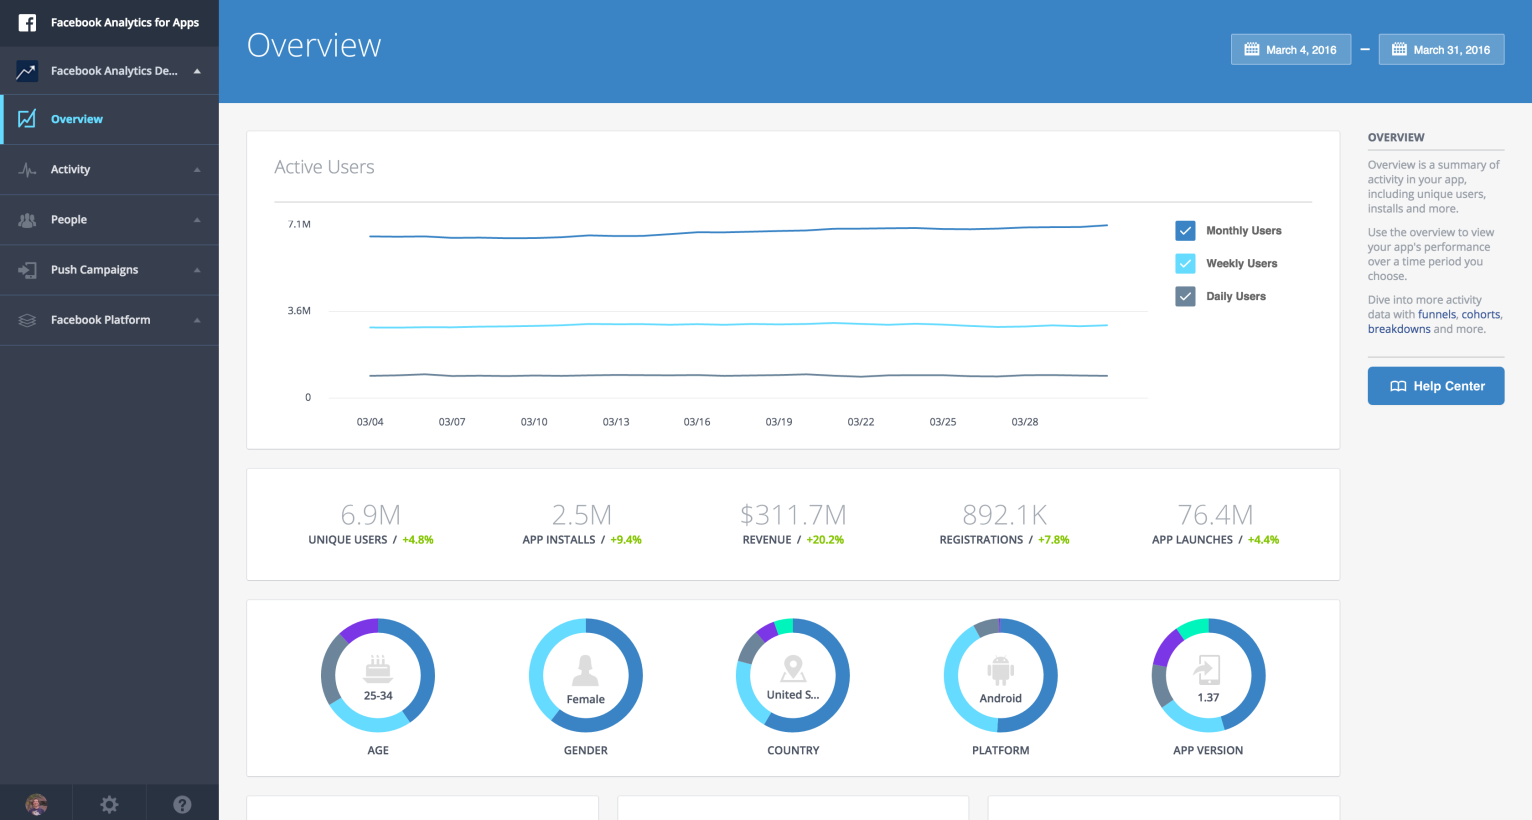 Facebook-Analytics-for-Apps-Overview-Screen